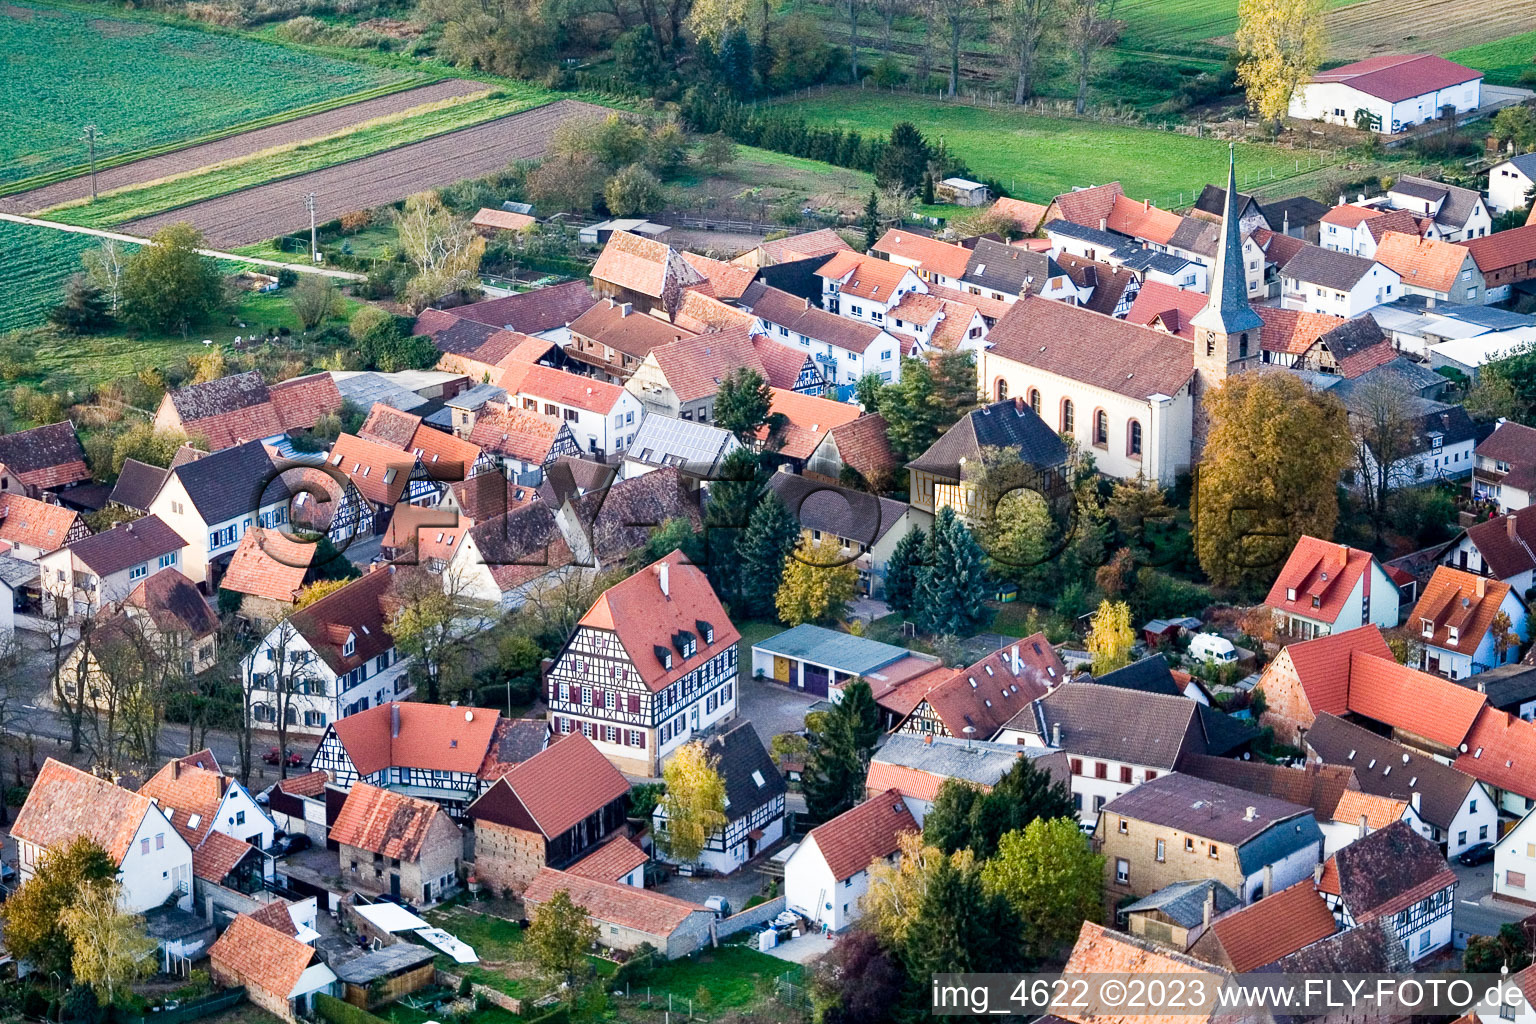 Aerial view of Main Street / Kirchstr in Knittelsheim in the state Rhineland-Palatinate, Germany